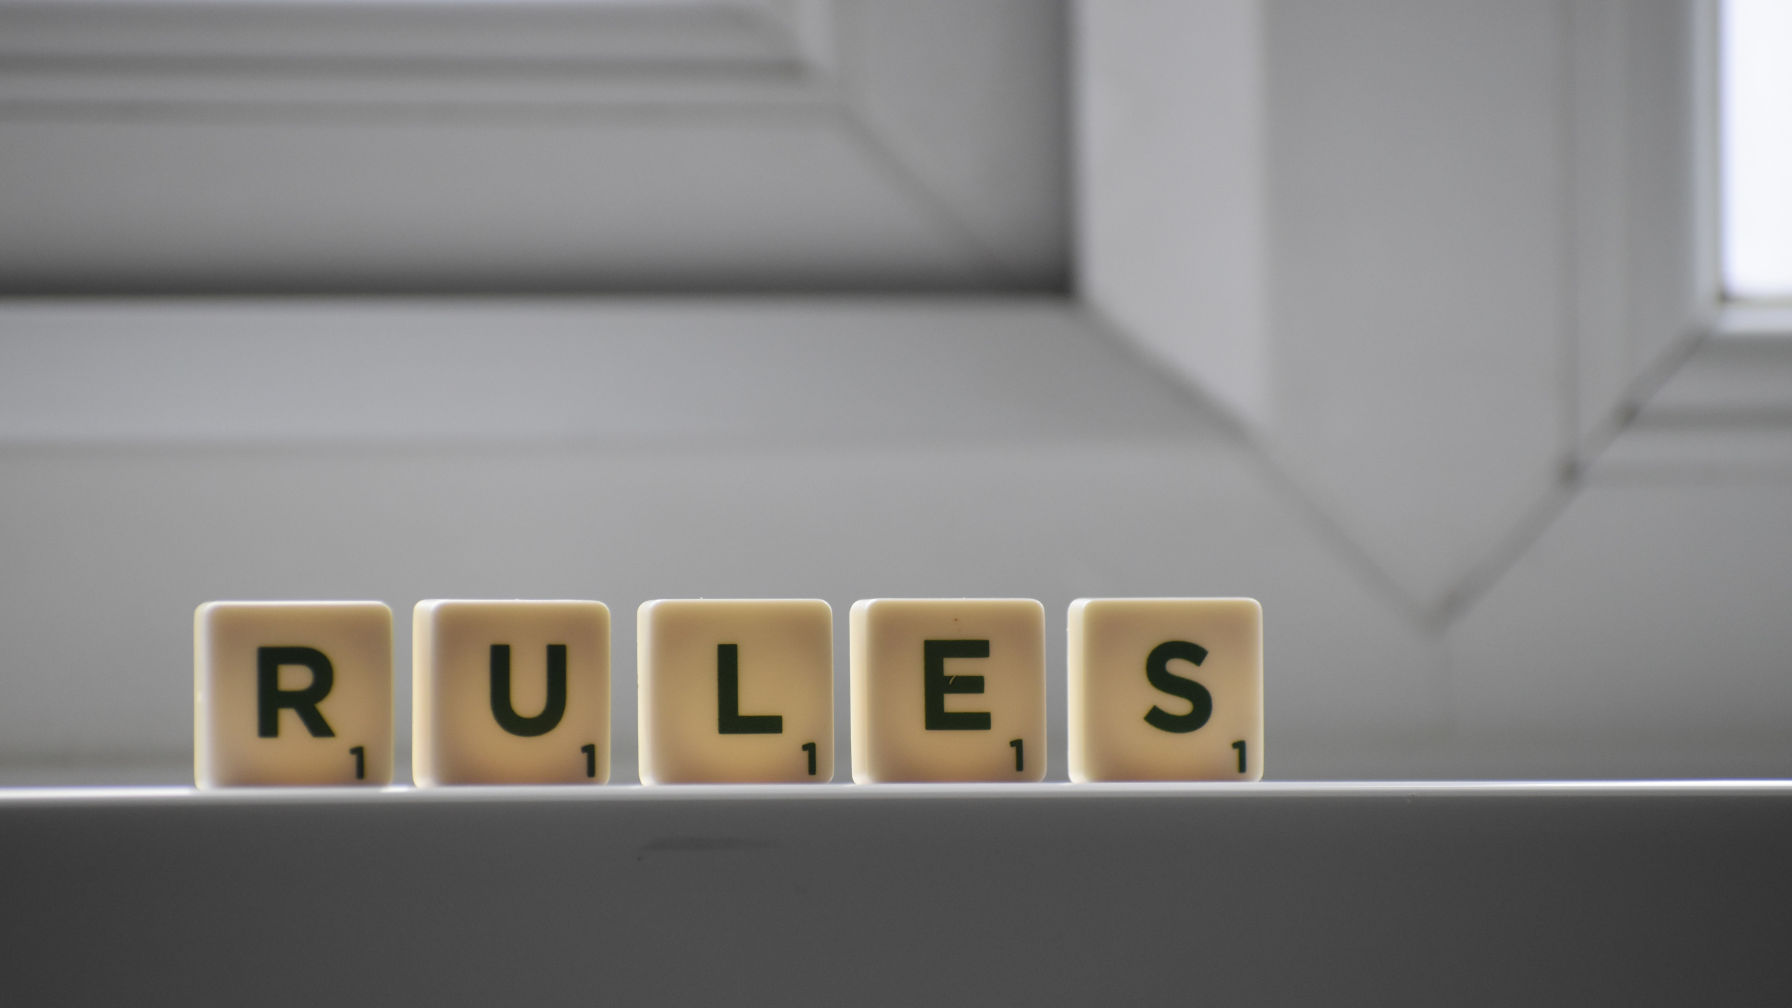 Decorative image that uses letters from the game of Scrabble to spell out 'RULES'.